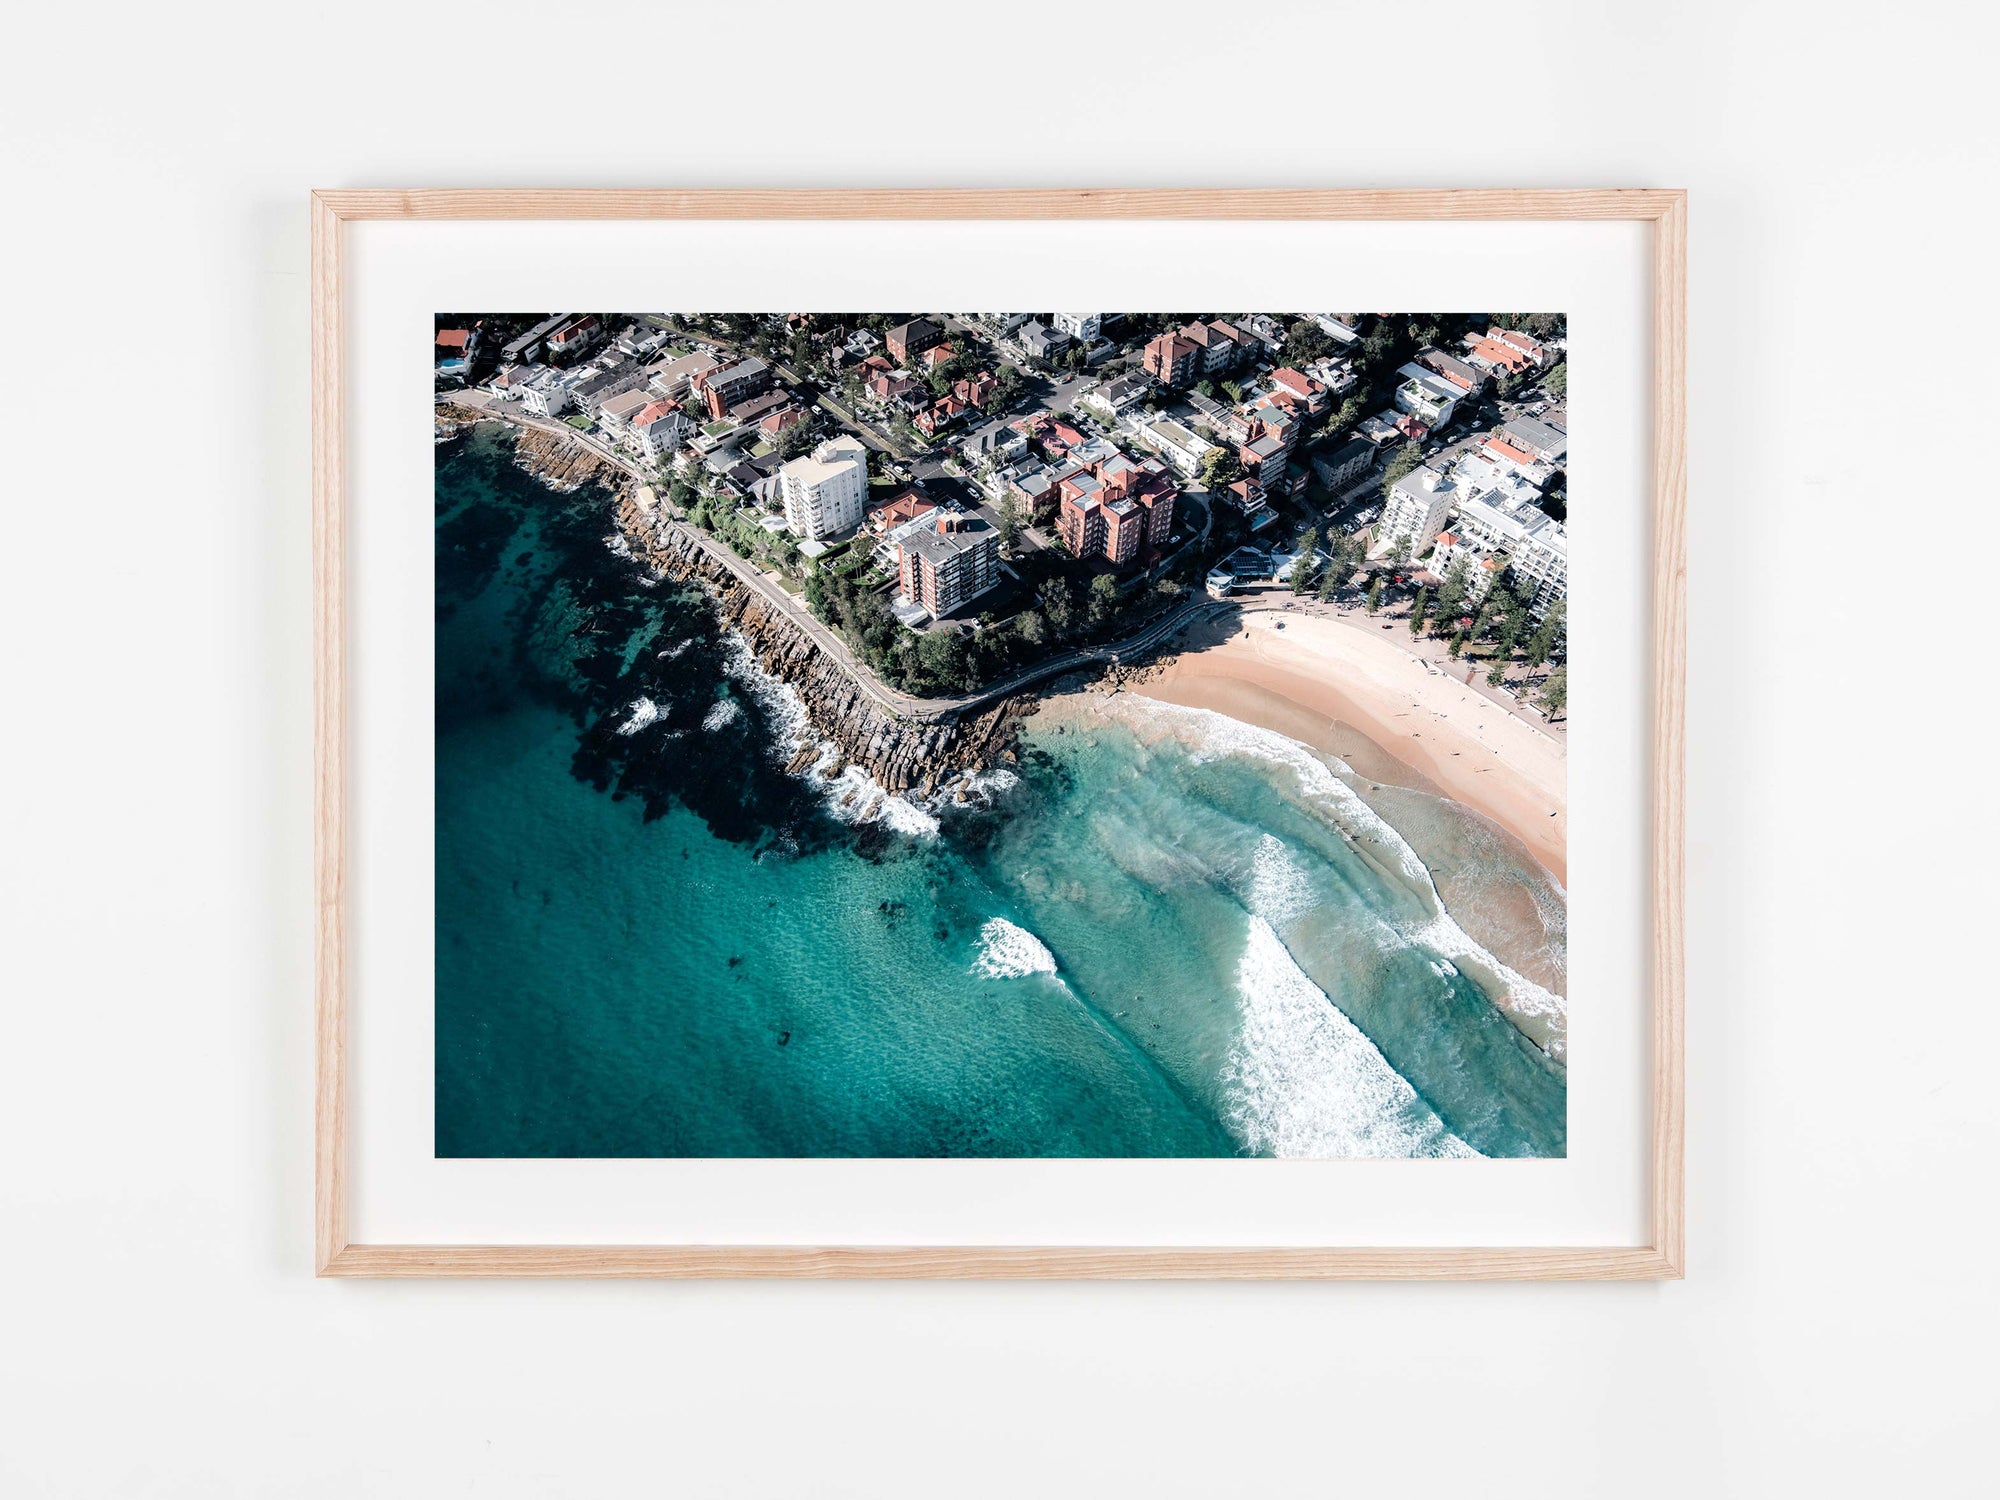 SW1089 - Manly